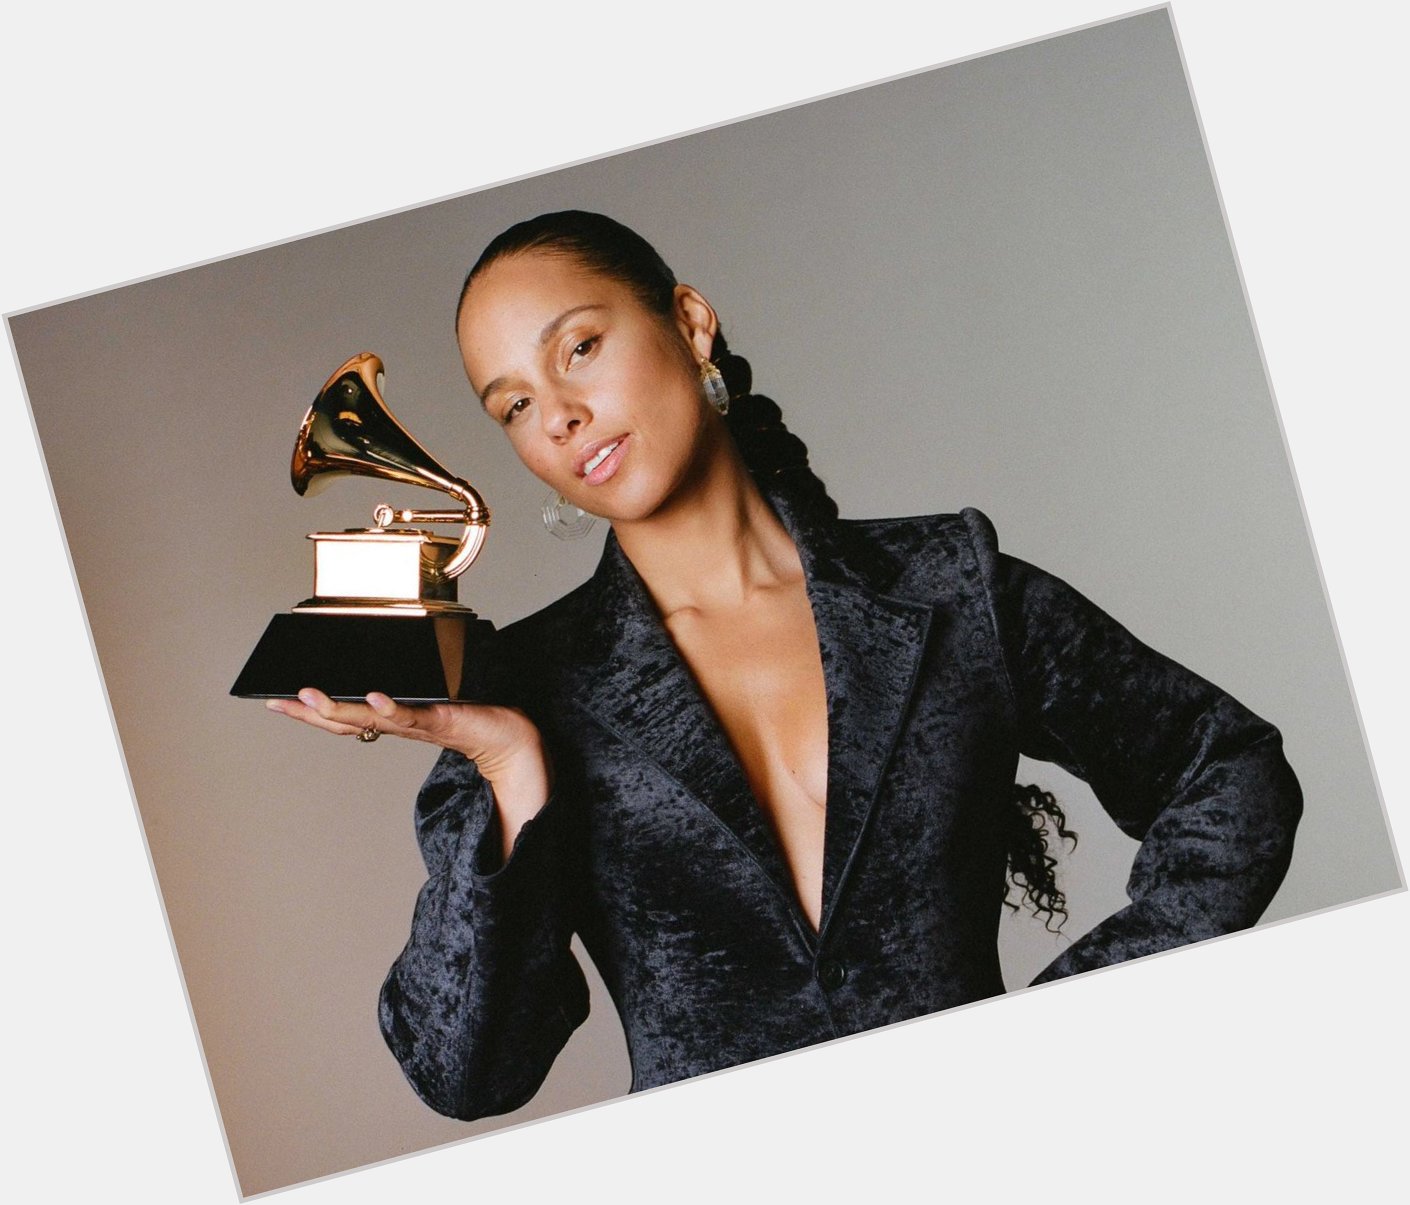 Happy 40th birthday to a legend: Alicia Keys! What s your favorite song by her? 